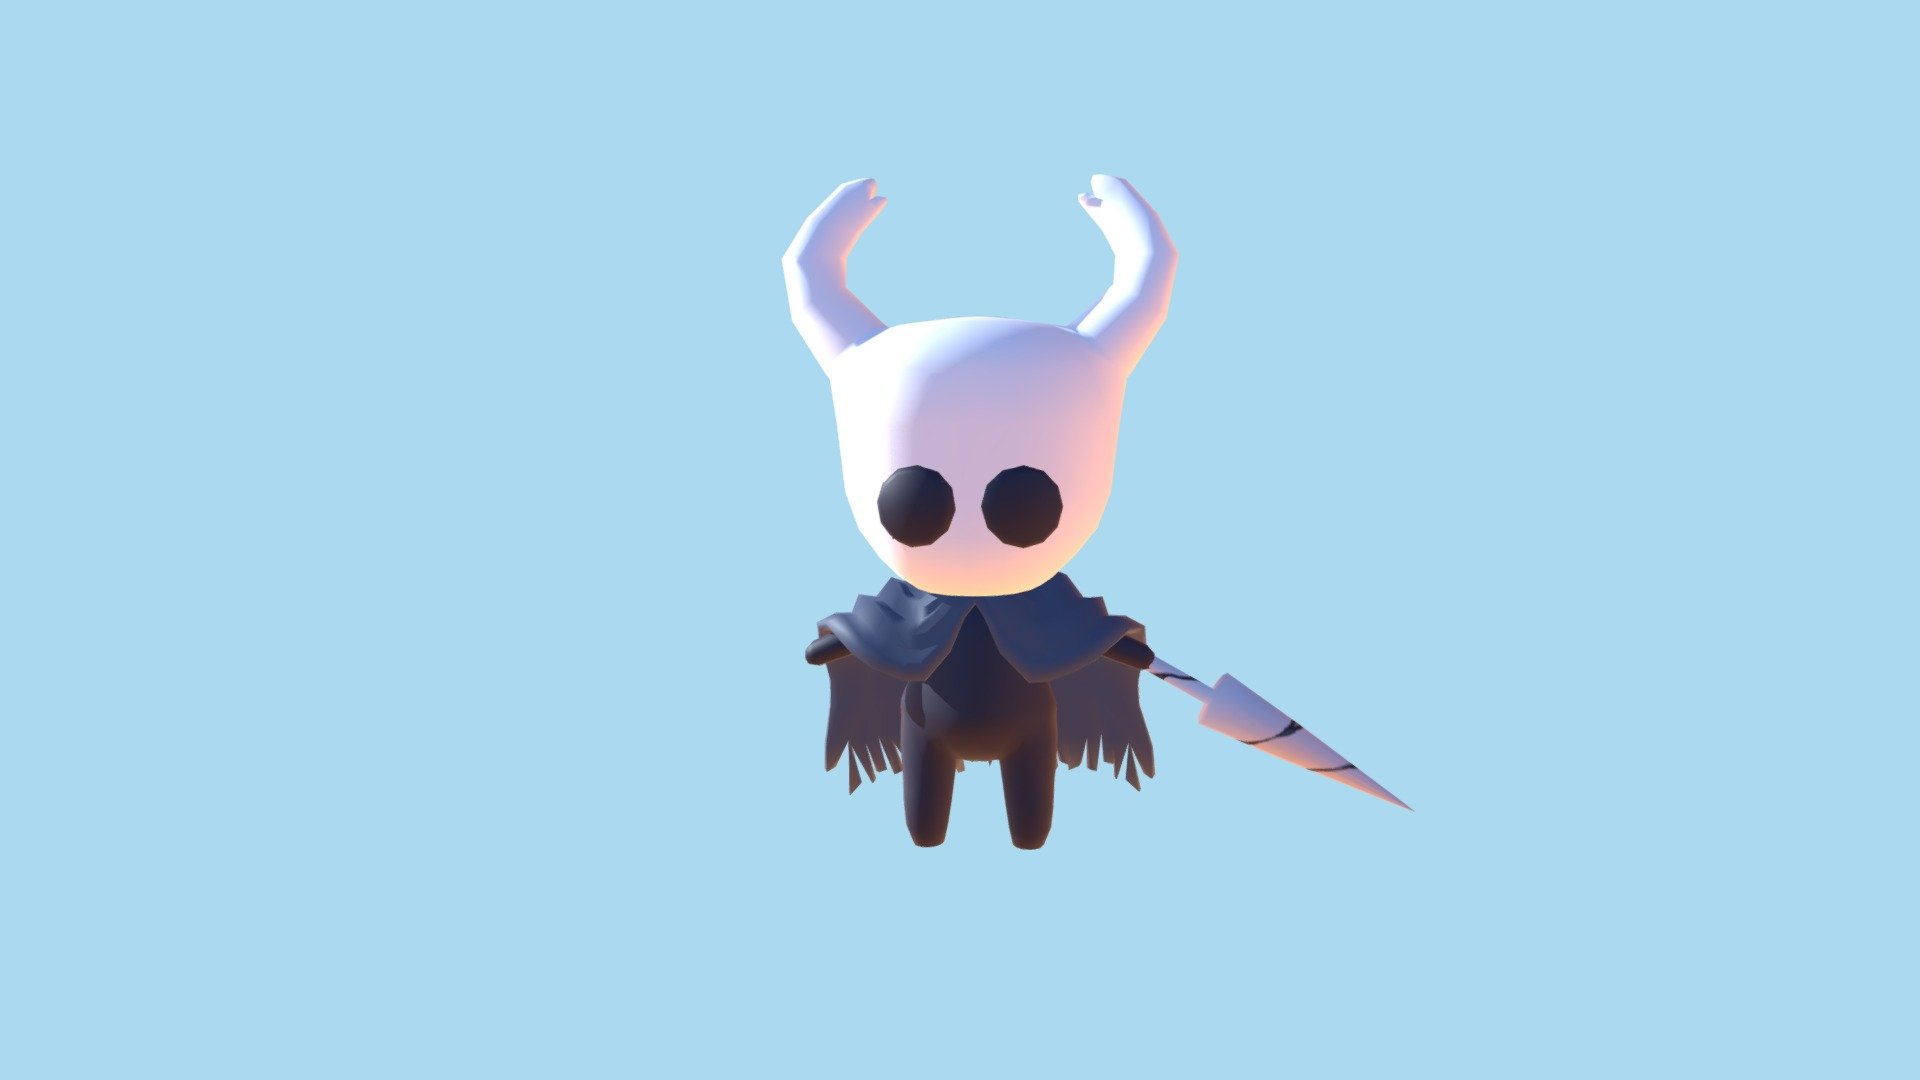 The free version of my other Hollow Knight model.

Tip me if you want to -&gt; http://ko-fi.com/juantreed

Ready to use VR Chat Avatar -&gt; https://mega.nz/#!RwFhBSDK!sjOOhLALVg-0u2Y5ABVr-_P0dk-ScEsIS-4-Y_ezBaY - Hollow Knight - VR Chat - Free Download - 3D model by Miaru3d 3d model